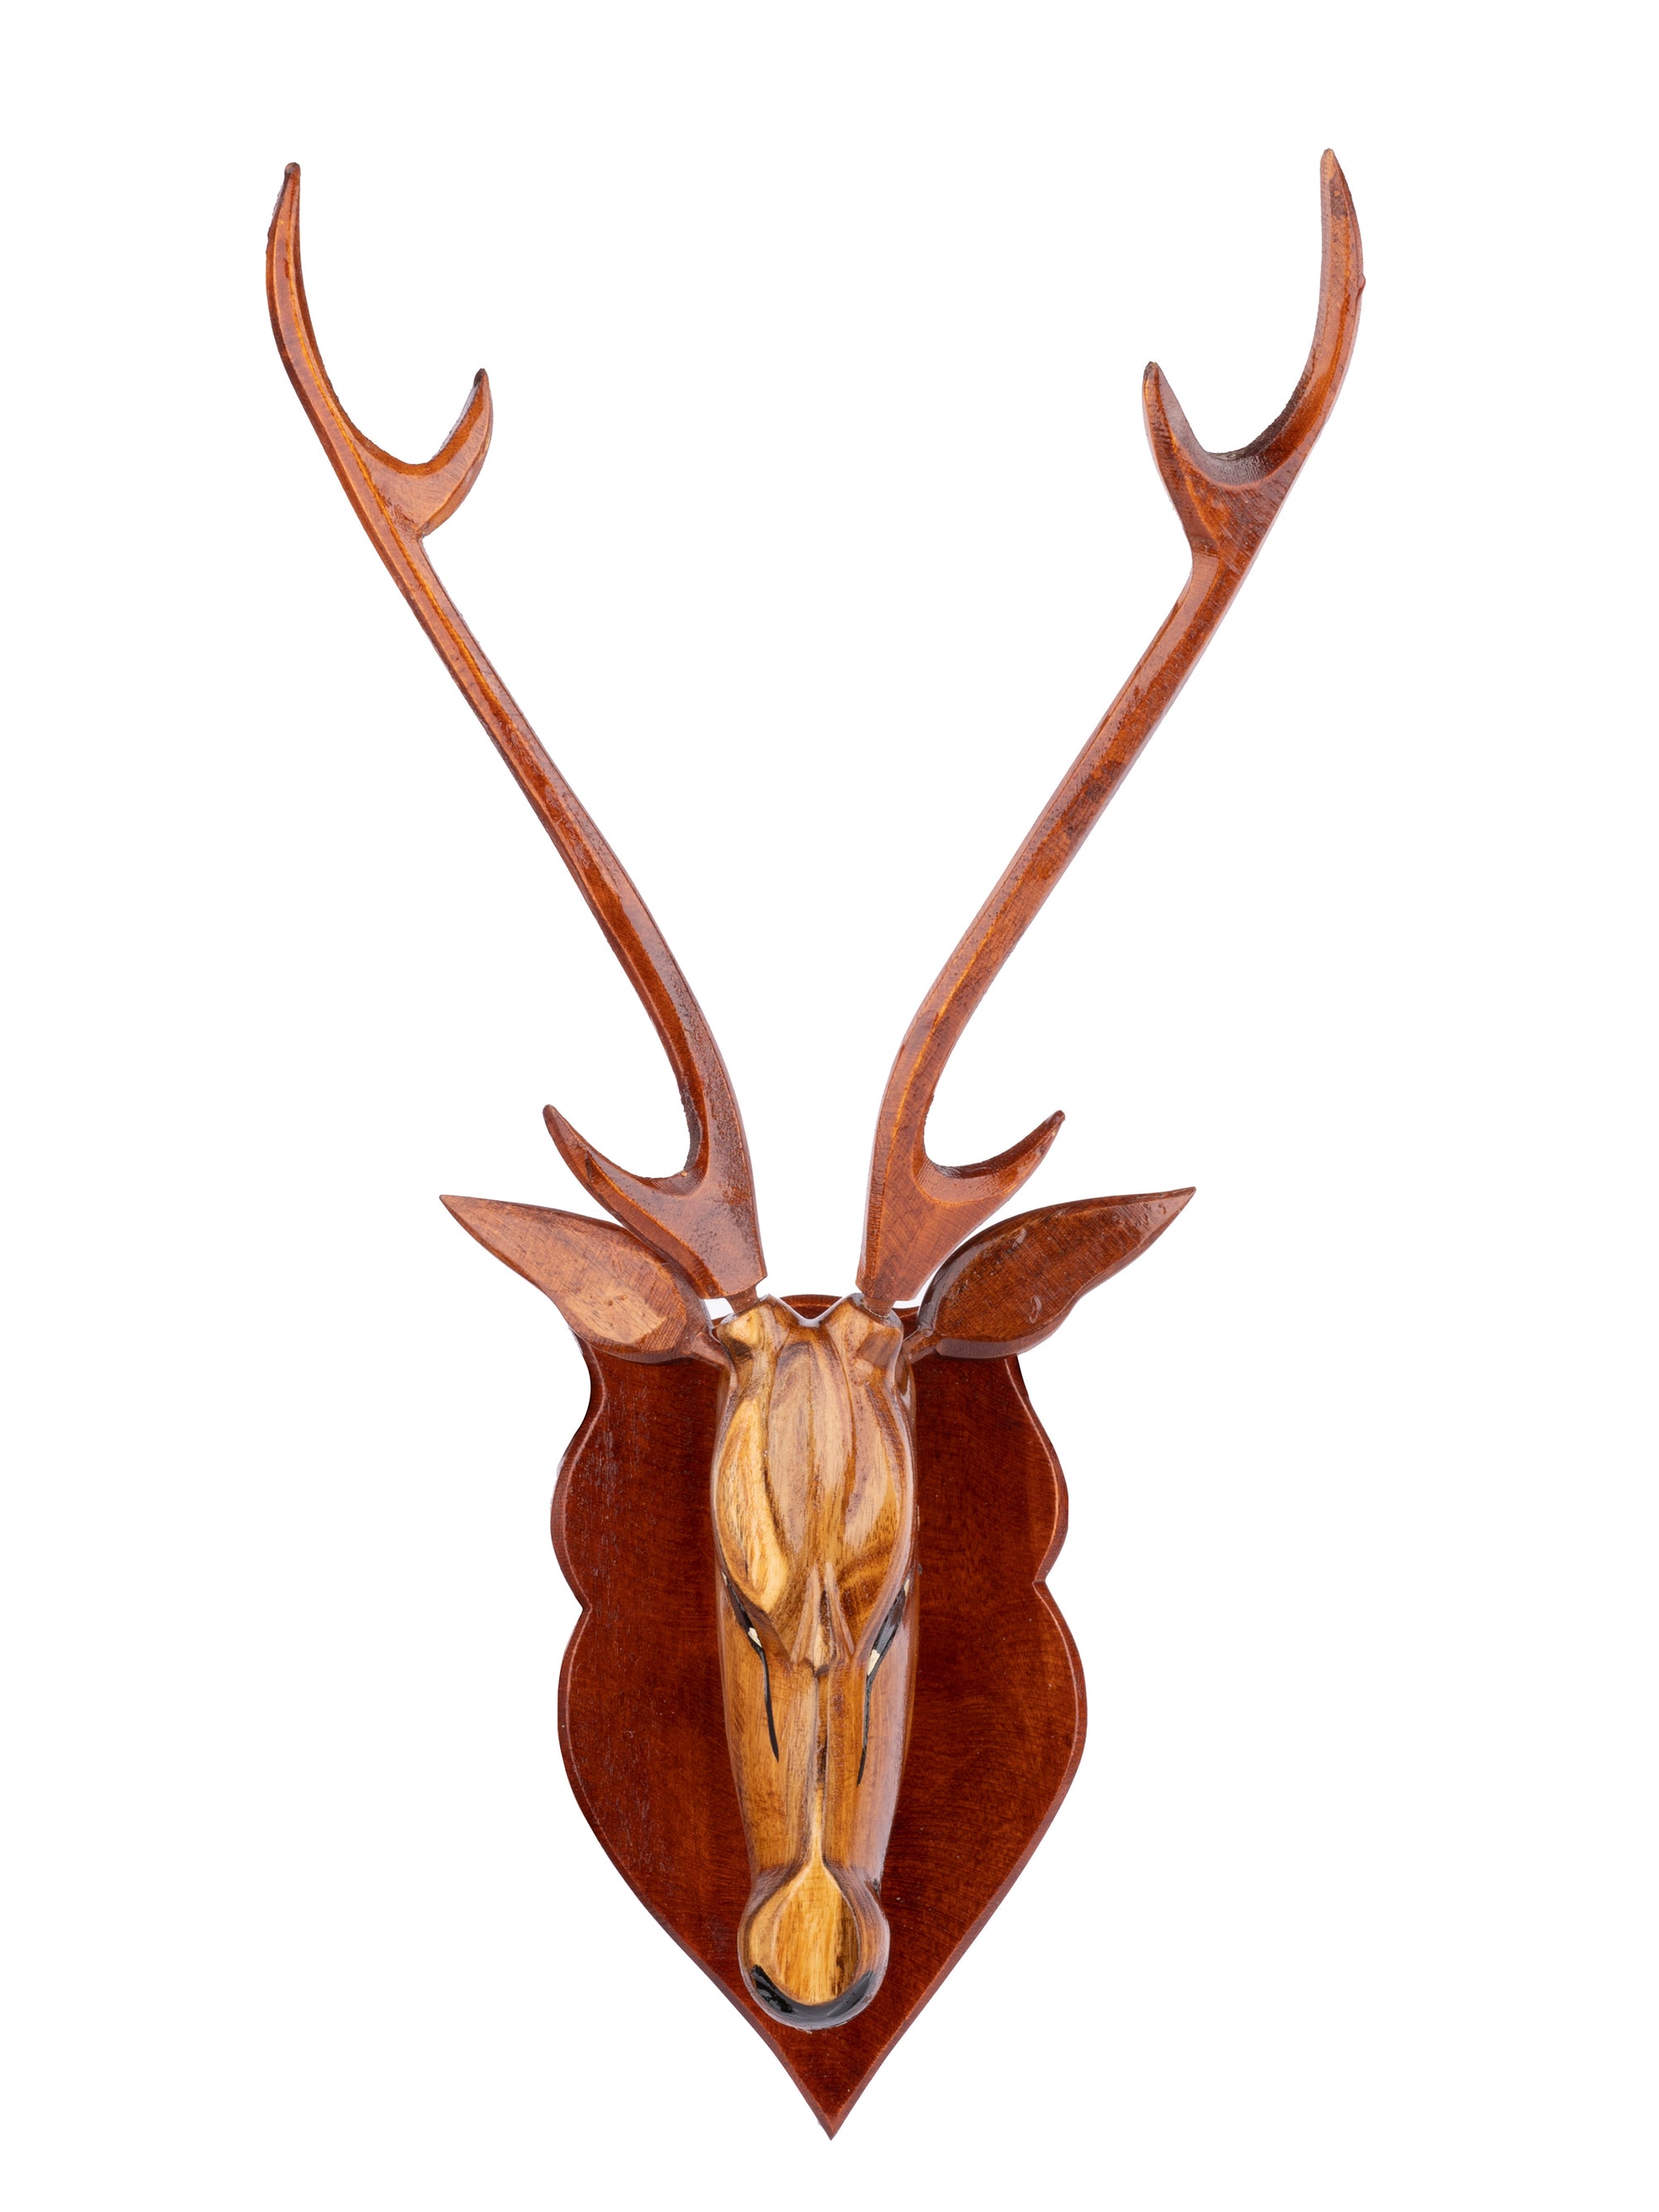 Wooden Home Decor wall Mounted Deer Head - The Heritage Artifacts